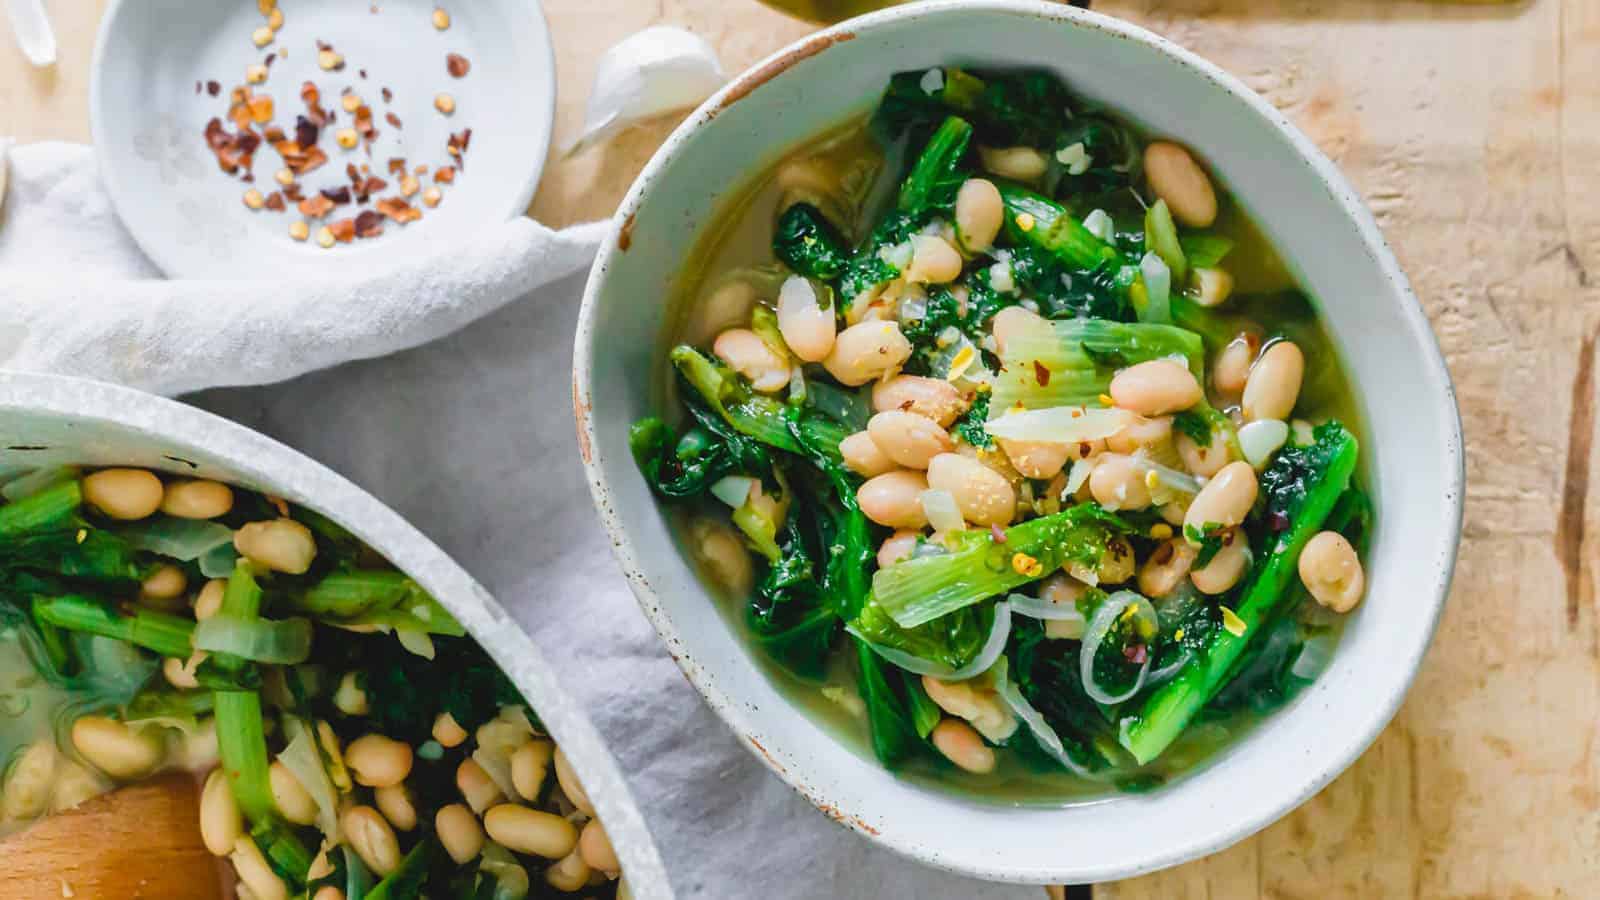 Escarole and beans in a white bowl with red pepper flakes on the side.